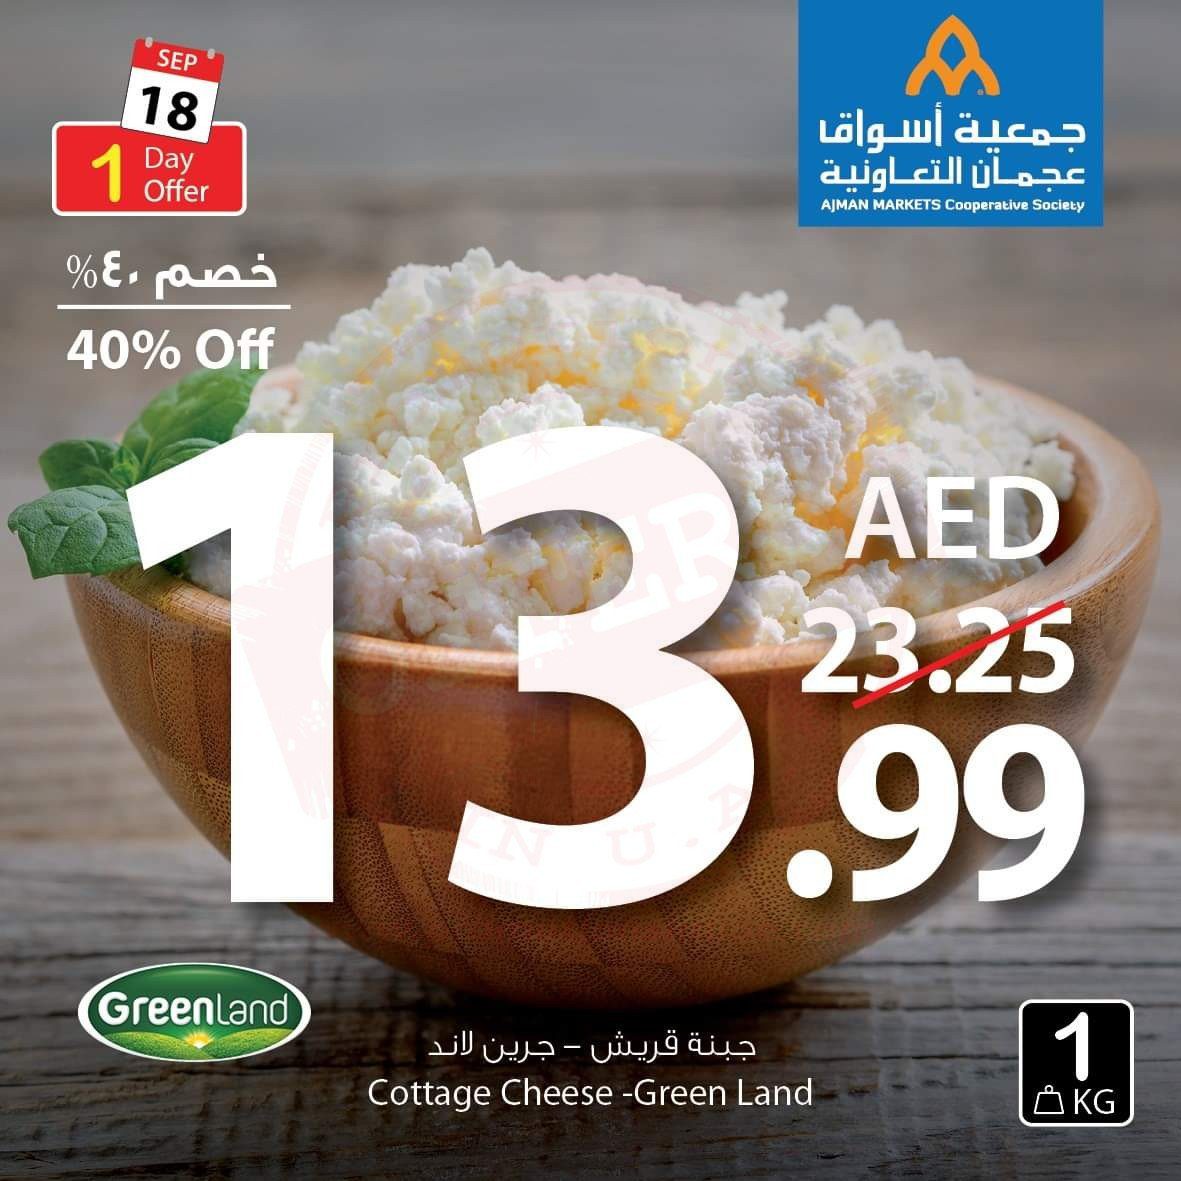 FB IMG 1568800276716 Amazing "One Day" Offer!! Ajman Coop